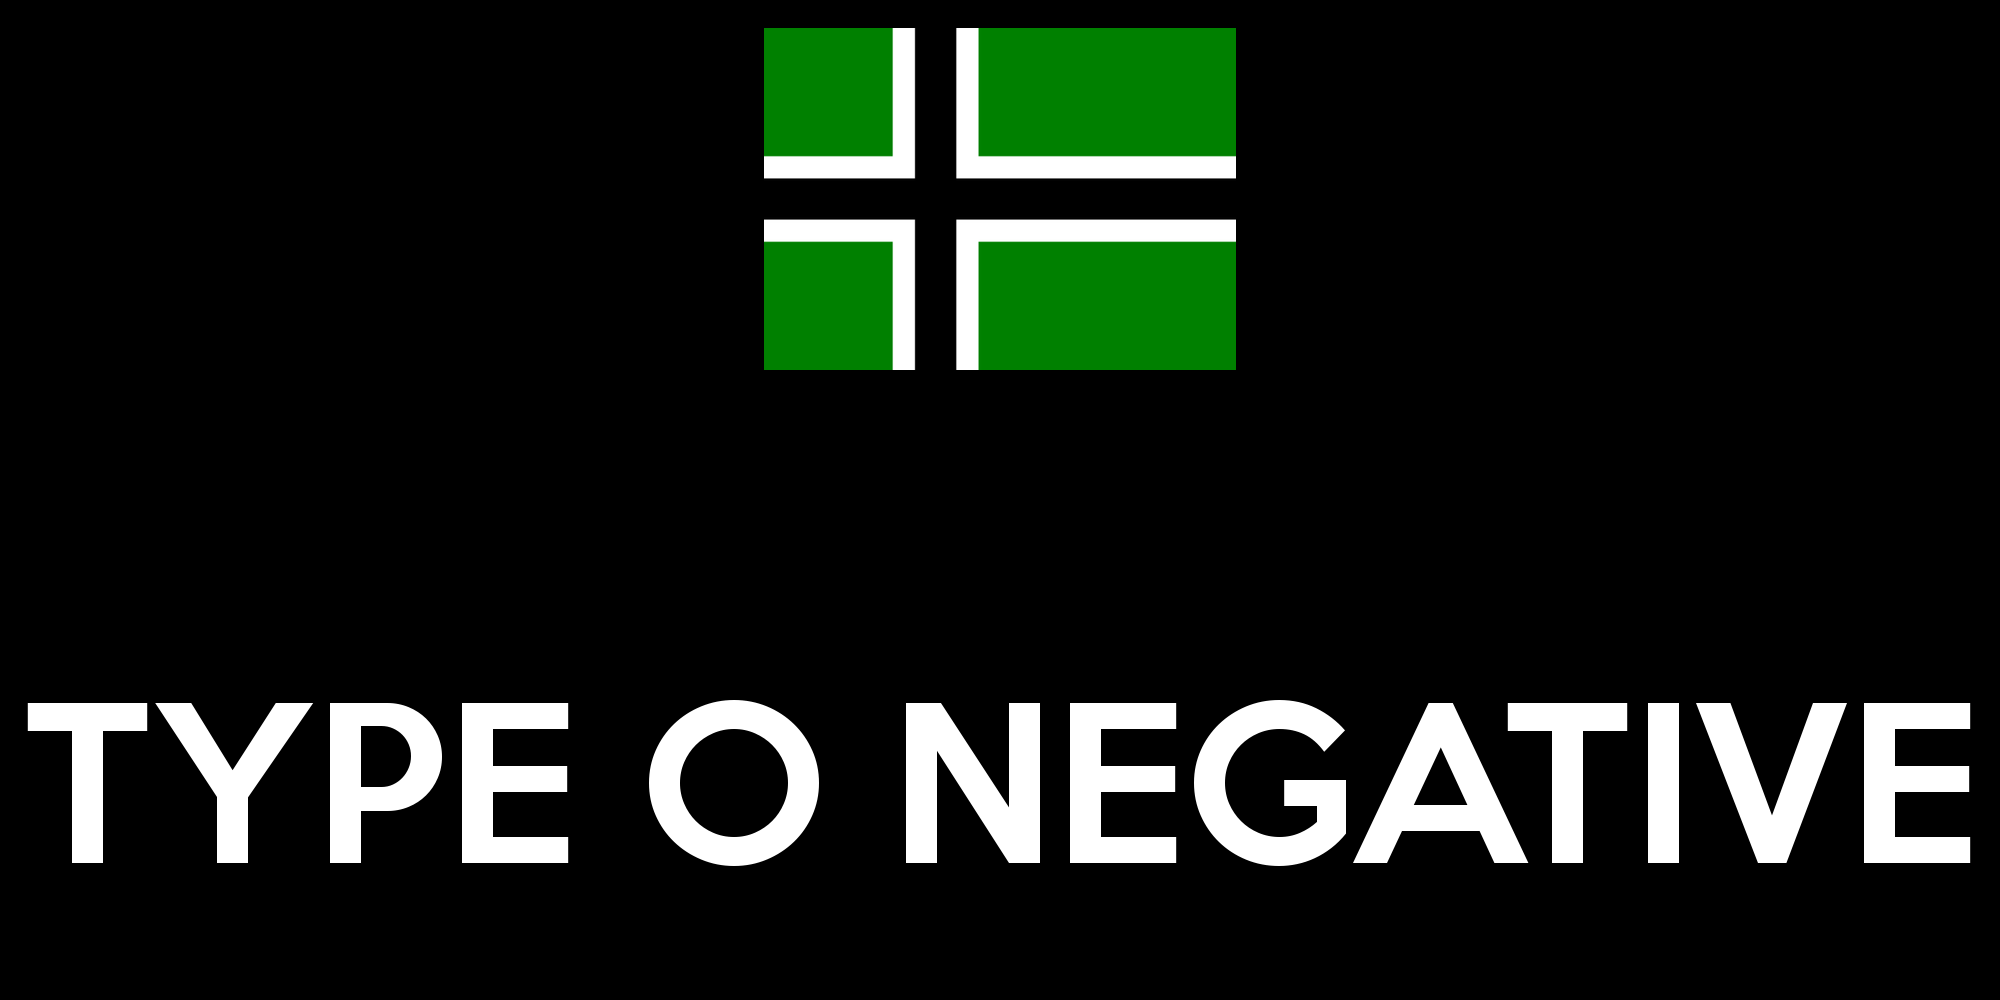 TYPE O NEGATIVE CALM AND CARRY ON Image Generator